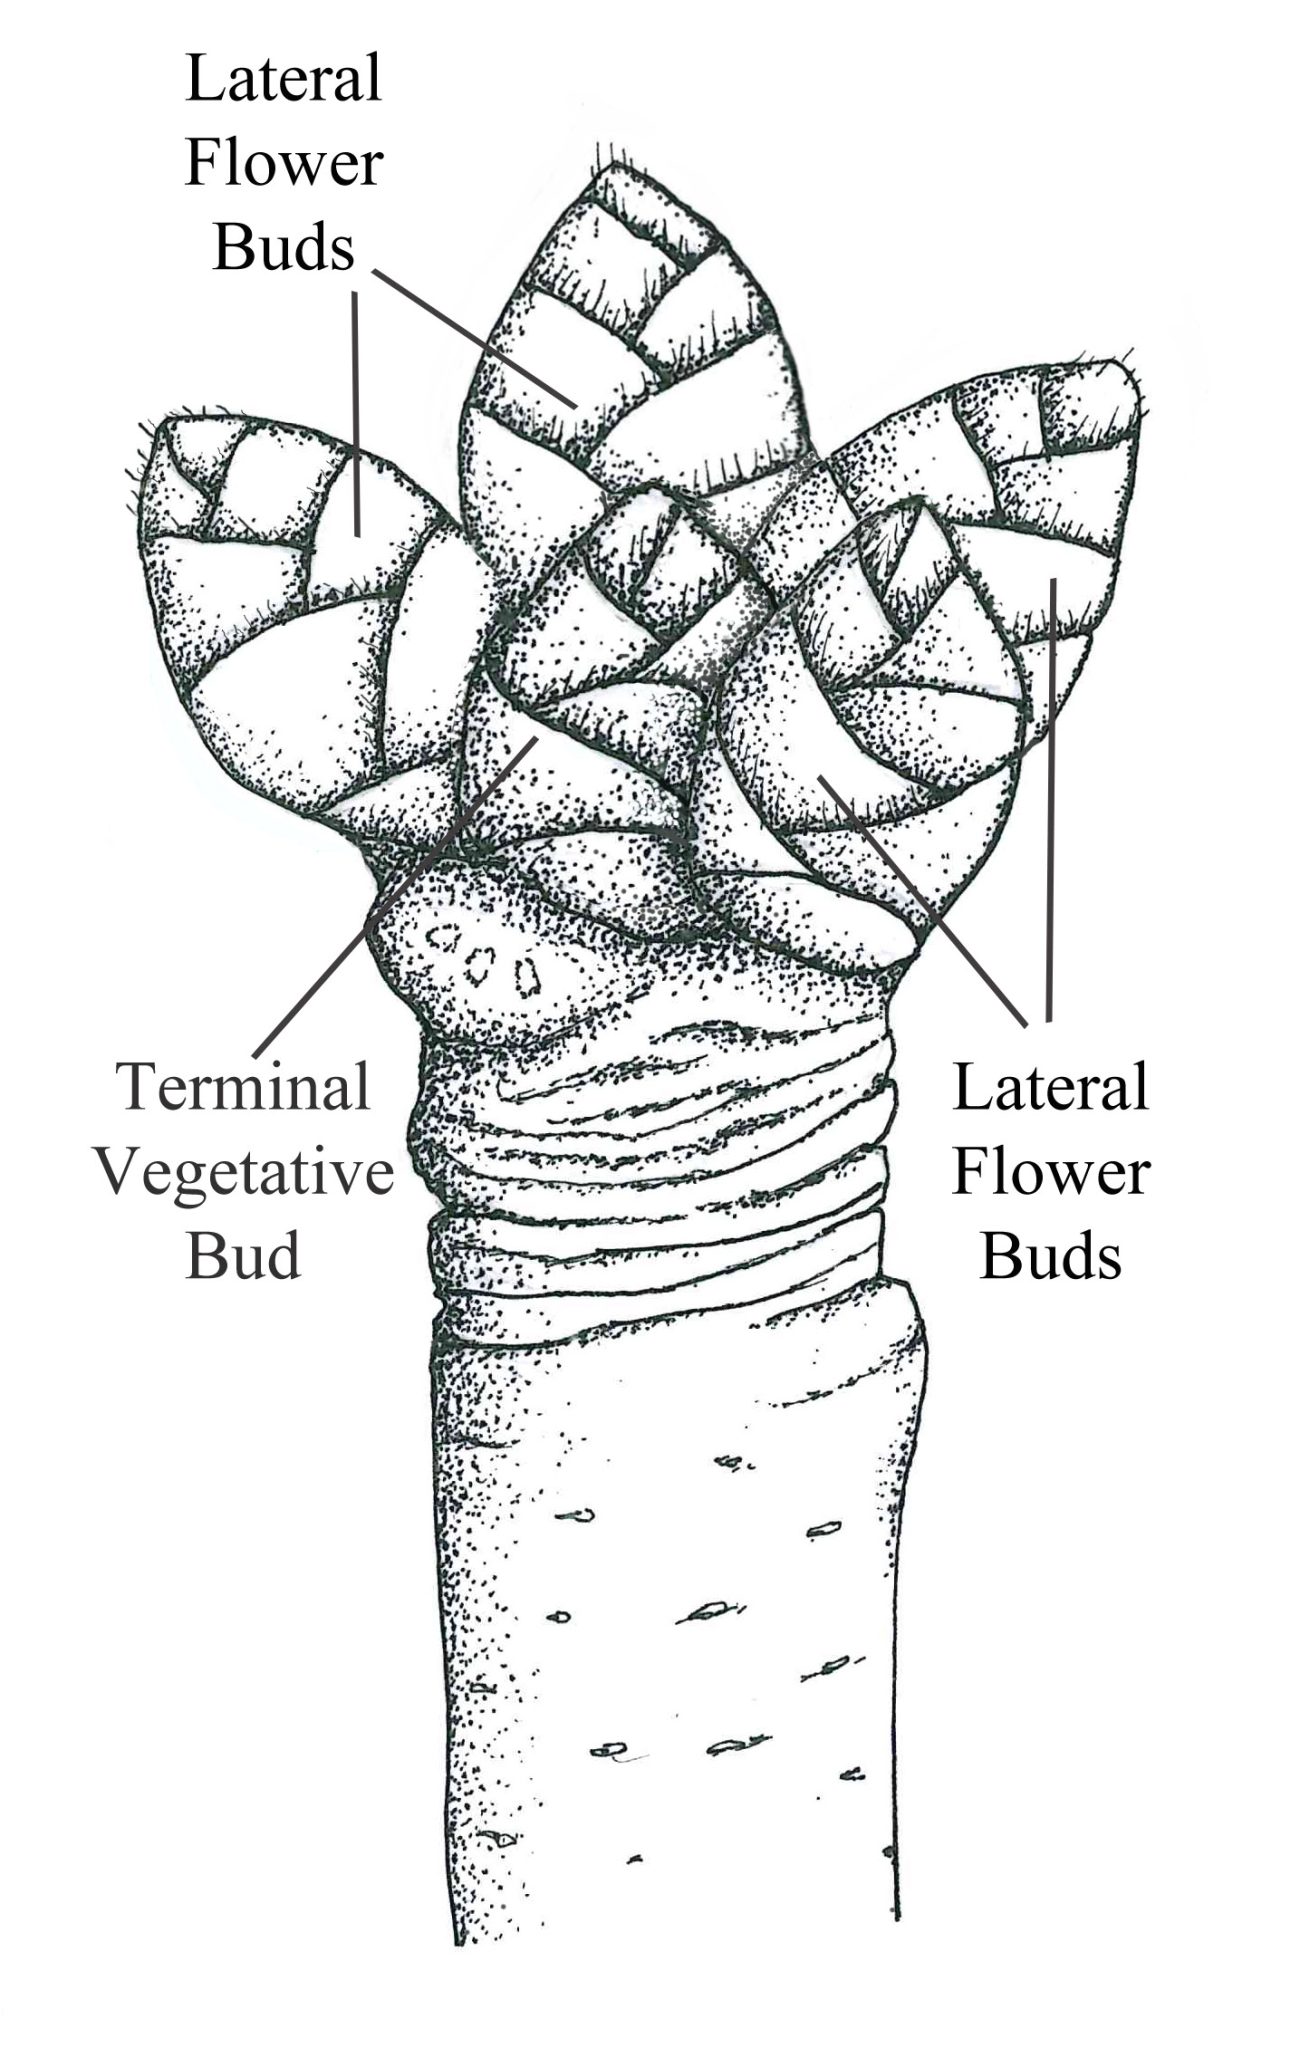 This illustration by H. Hartzog shows the lateral flower buds in relation to the terminal vegetative bud.